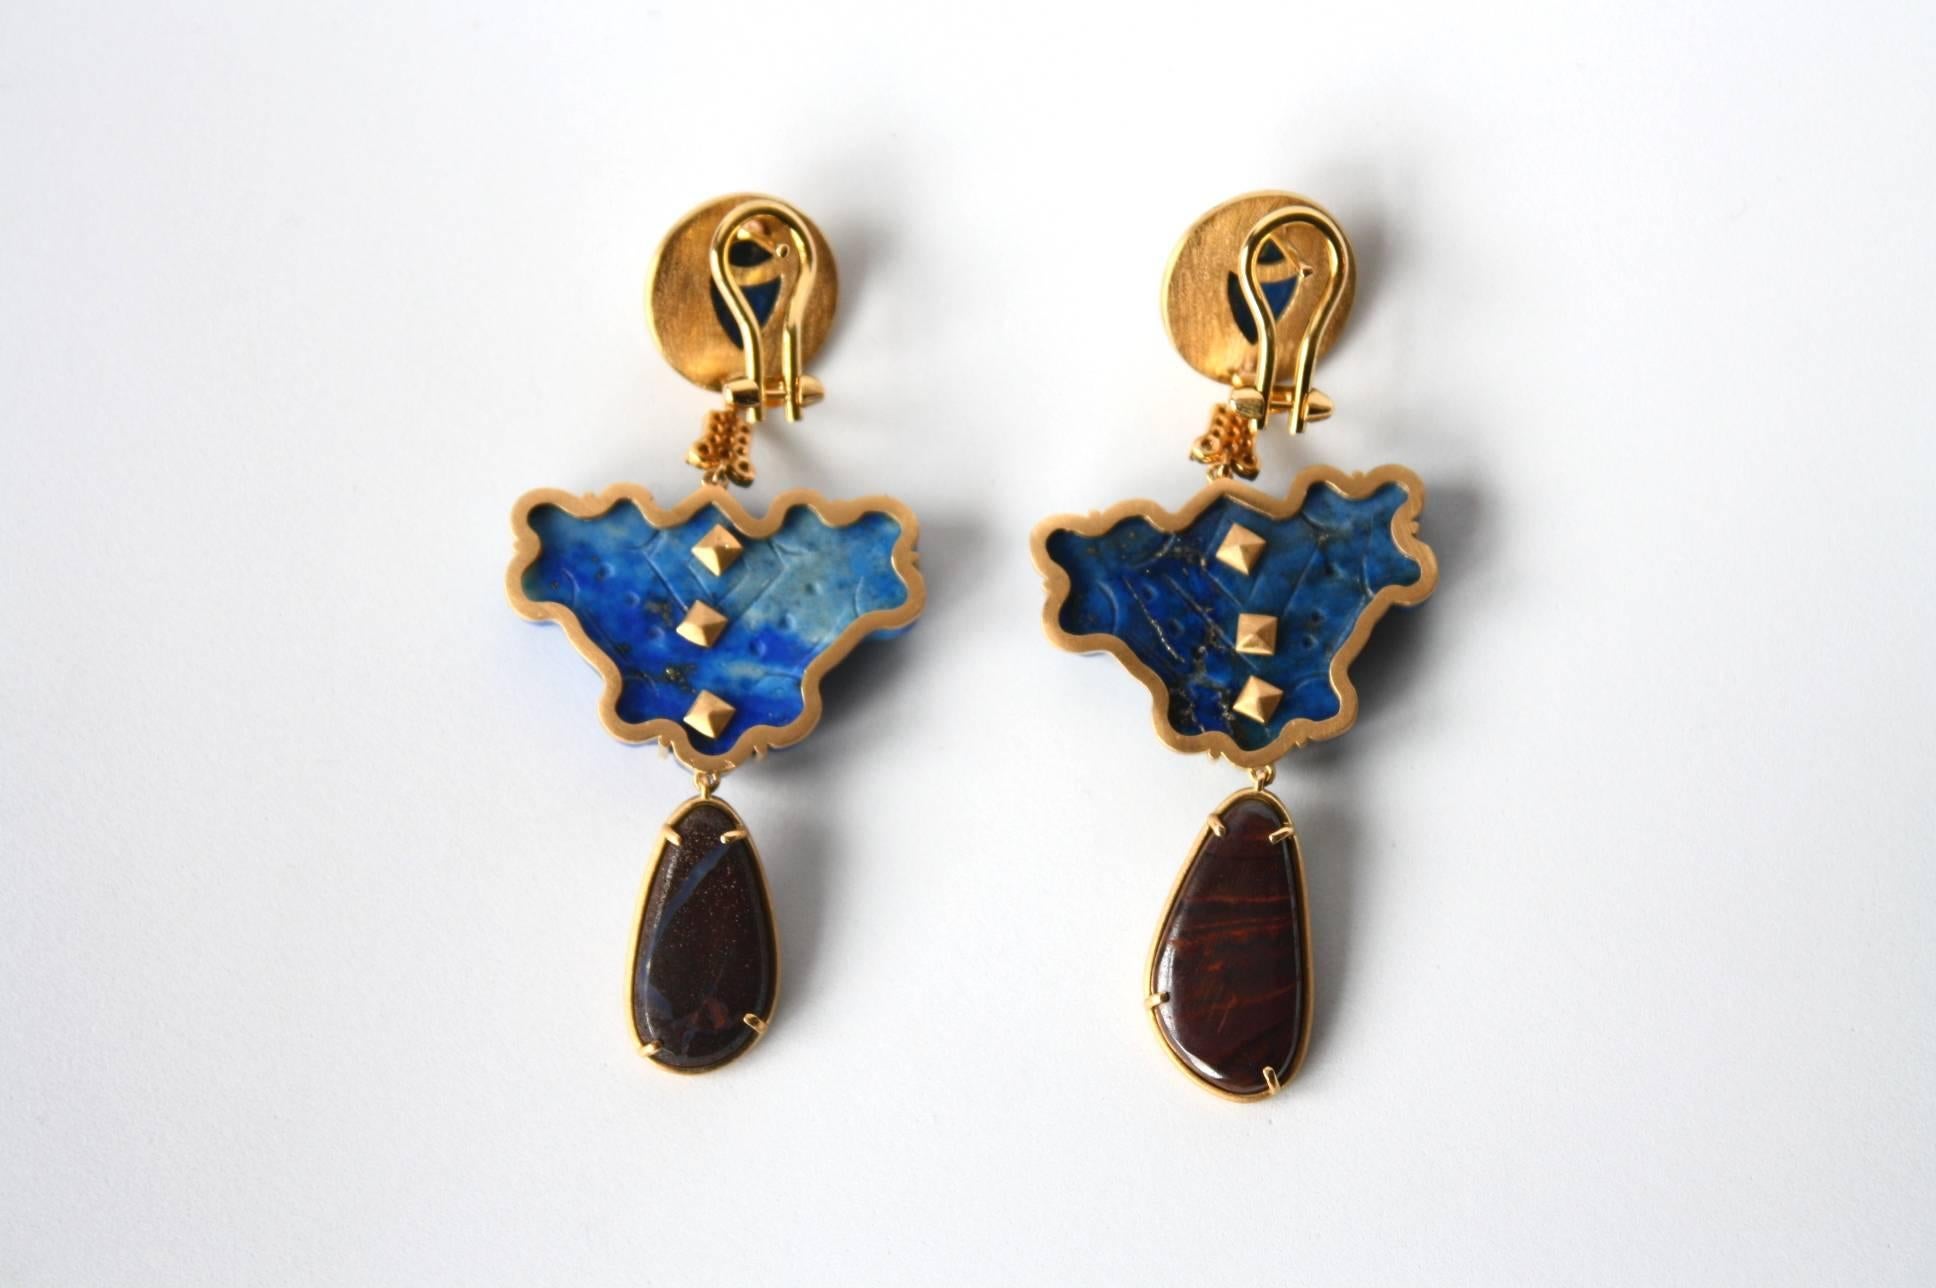 Antiques Chinese lapis lazuli carved stone and drop, brushed yellow gold gr 17,20, diamonds Cts 0,48 Australian opal dublette. total length 6,5 cm, weight 12,7 gr each.
All Giulia Colussi jewelry is new and has never been previously owned or worn.